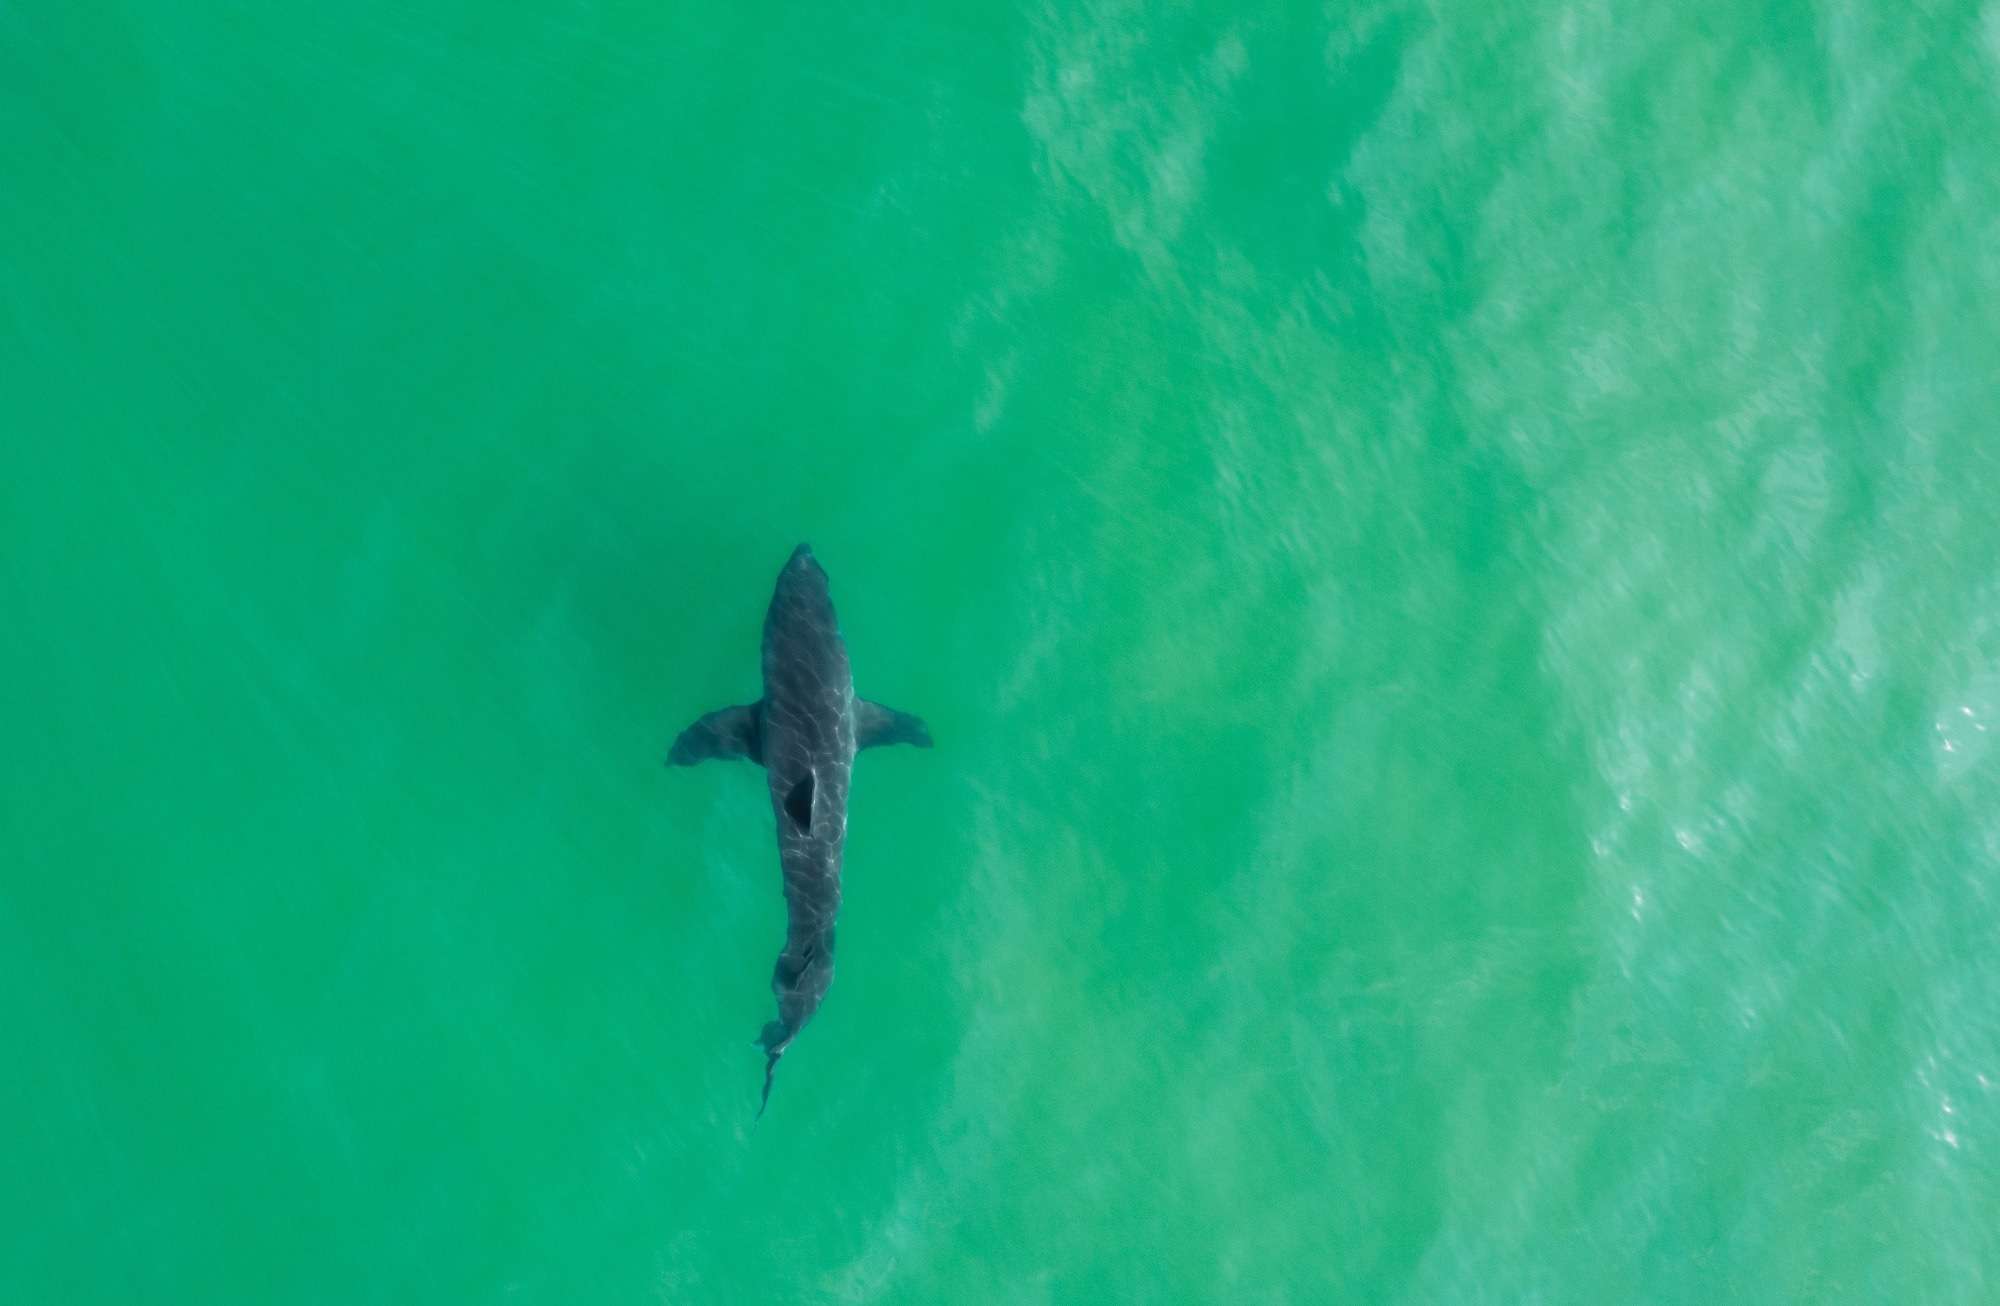 Study: Patterns of overlapping habitat use of juvenile white shark and human recreational water users along southern California beaches. Image Credit: Mark F Lotterhand / Shutterstock